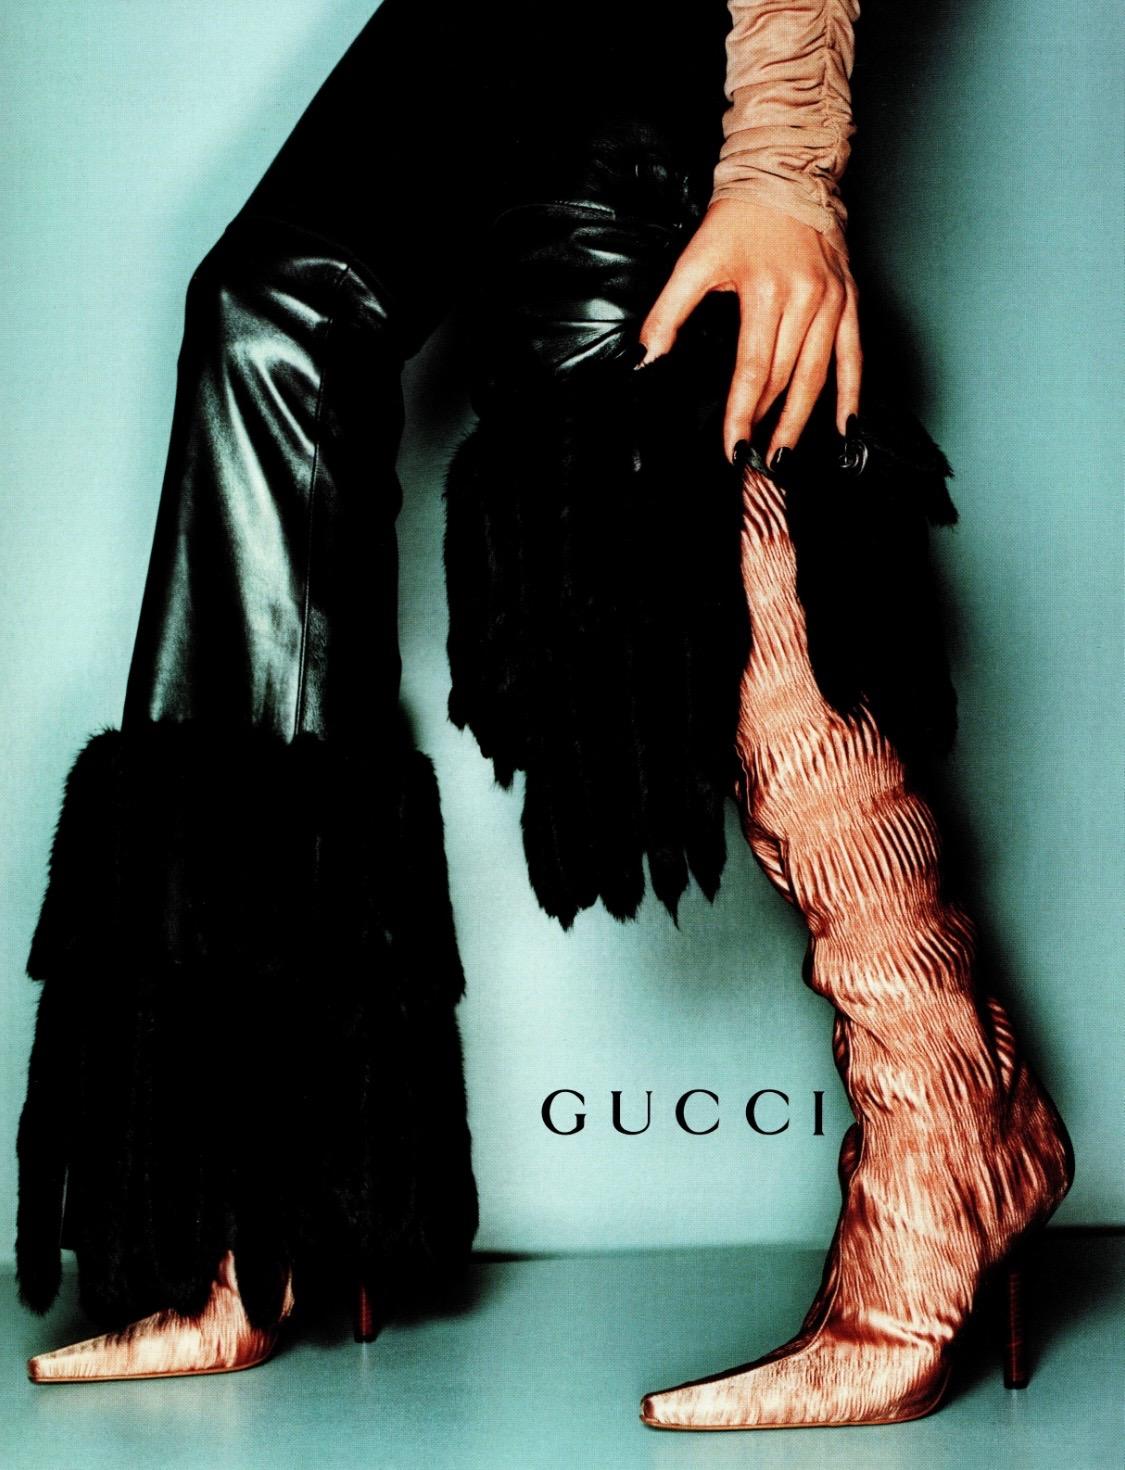 Presenting a rare pair of ruched silk high-heeled boots designed by Tom Ford for Gucci's Fall/Winter 1999 collection. According to Ford, this collection was meant to be cleaner than the previous season, which is remembered for its heavy use of